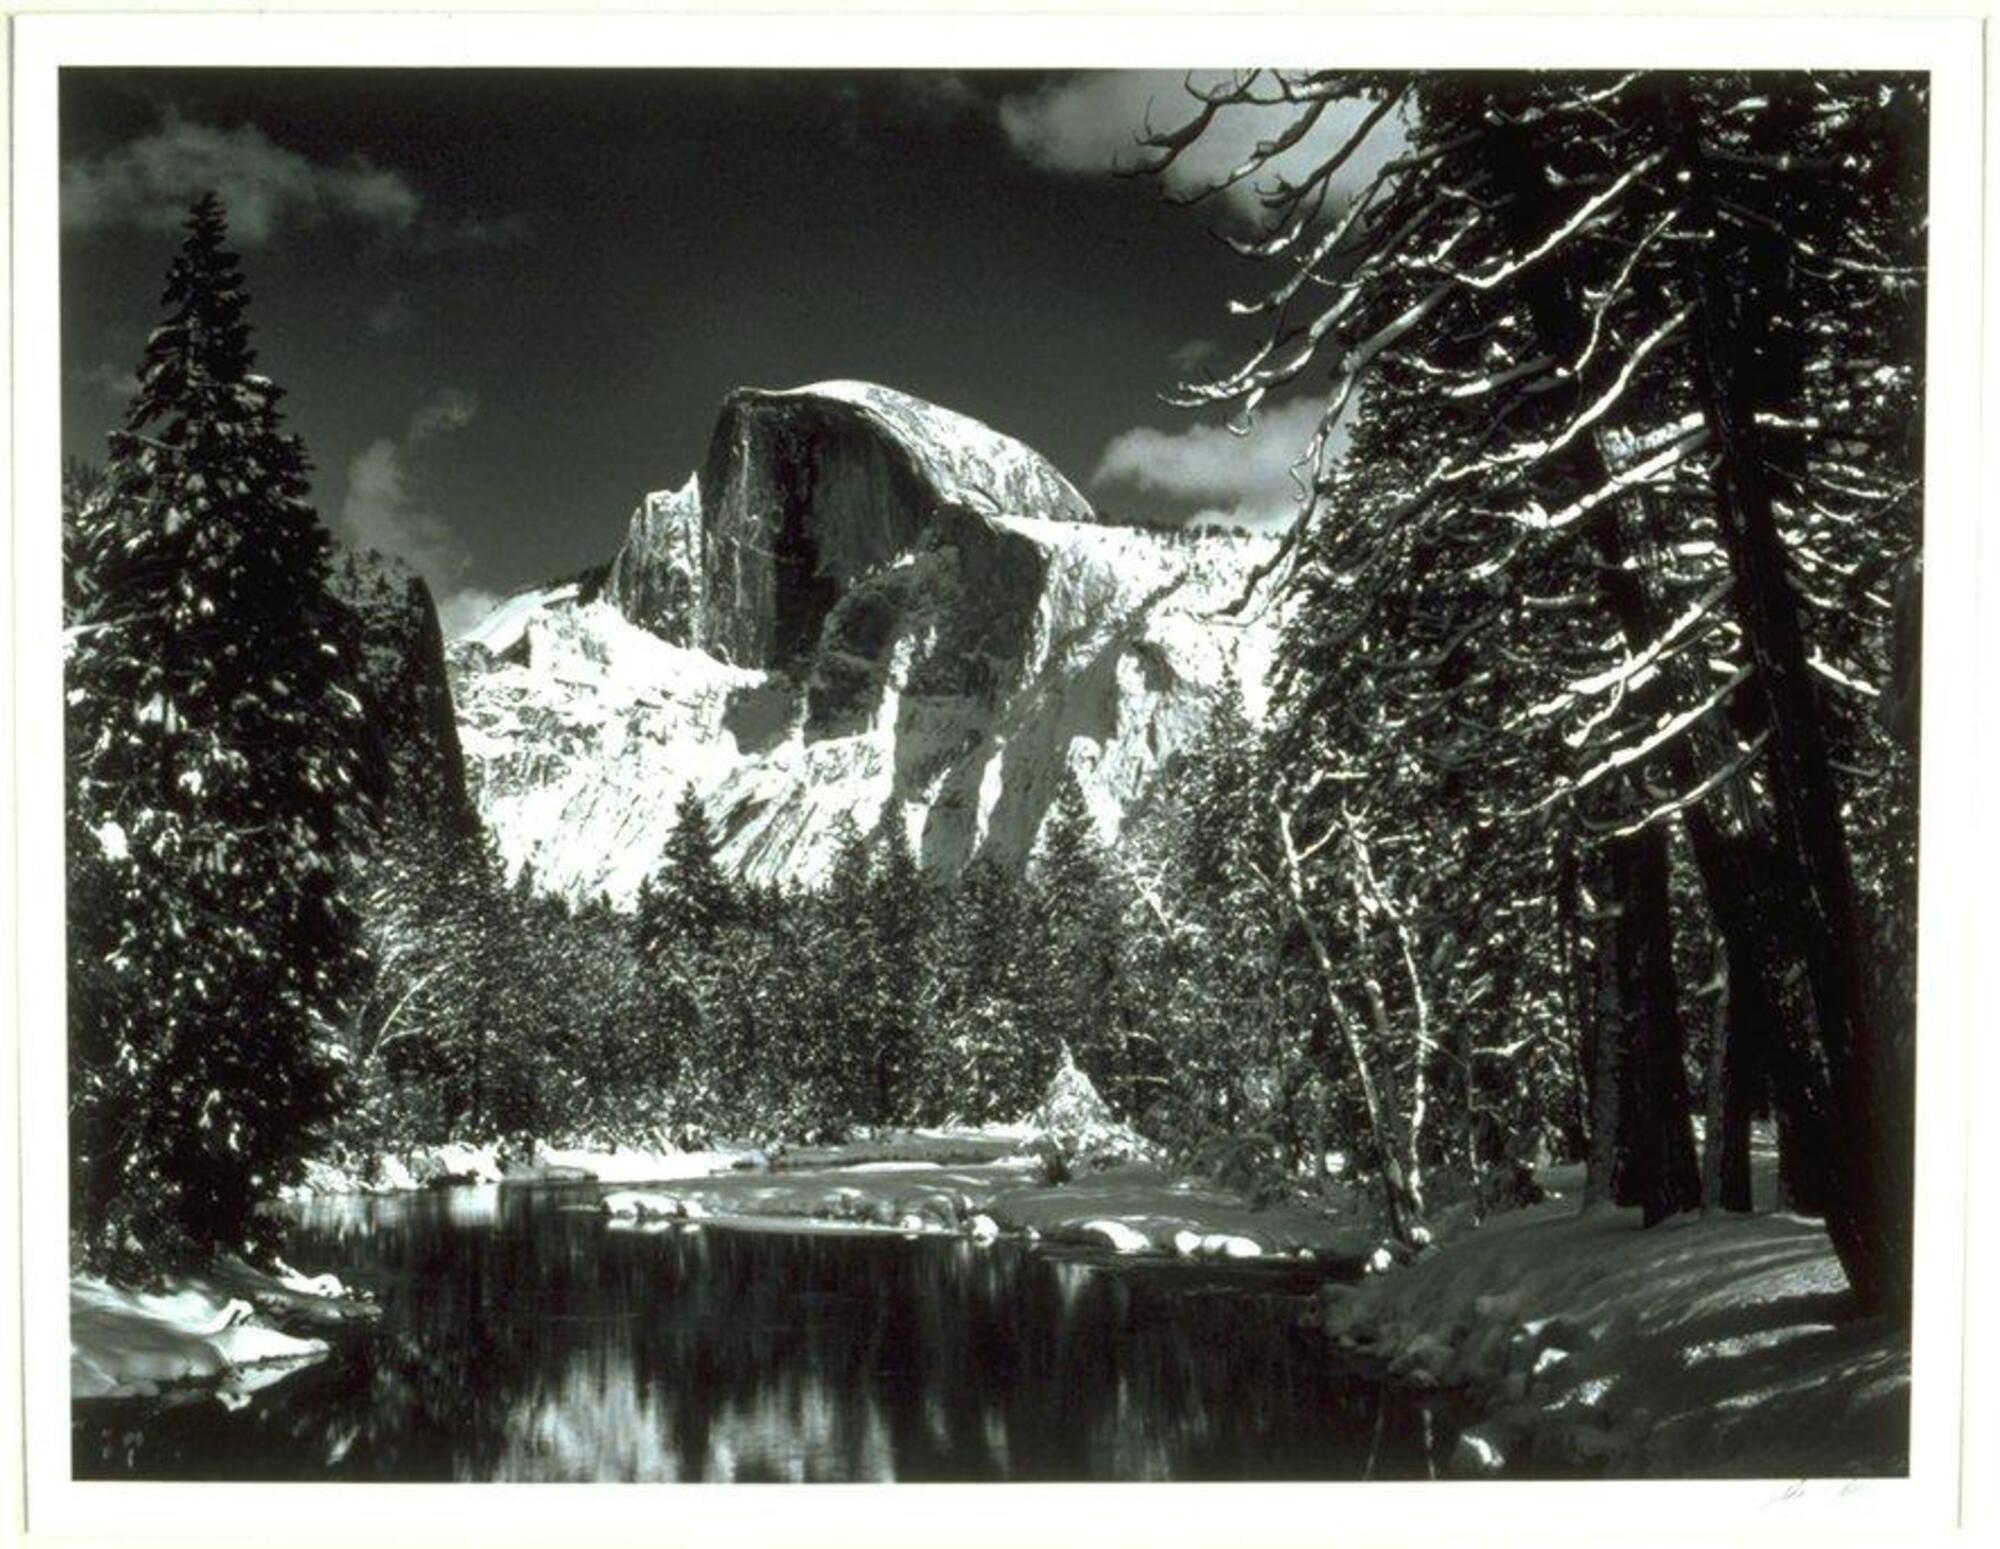 The photograph depicts a river lined with snow-covered banks and pine trees and a snow-capped mountain rising in the distance.  